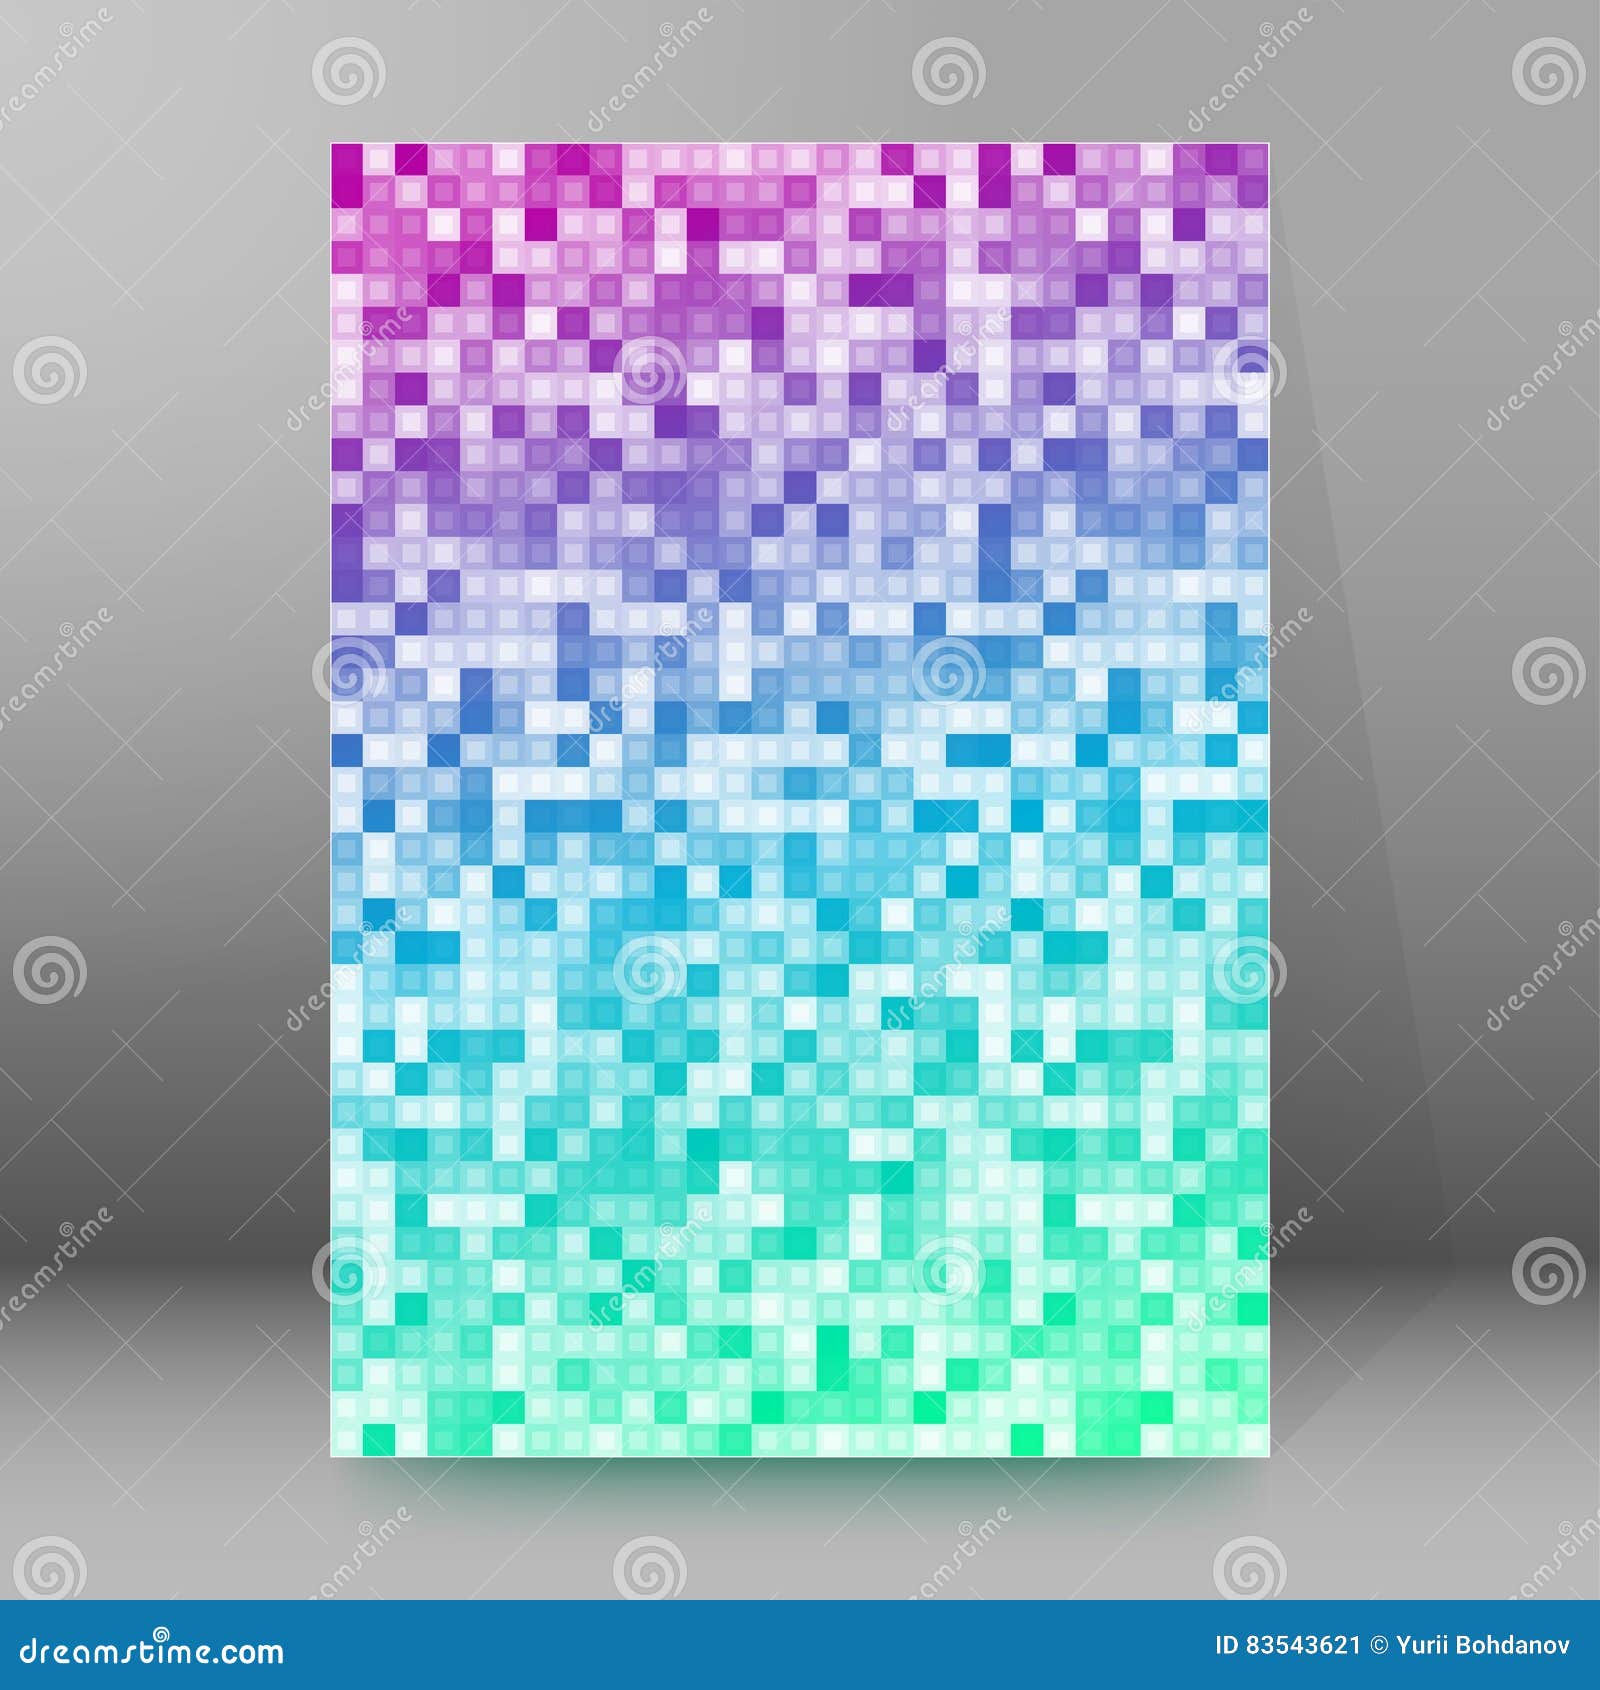 Background Report Brochure Cover Pages A4 Style Abstract Stock Vector ...